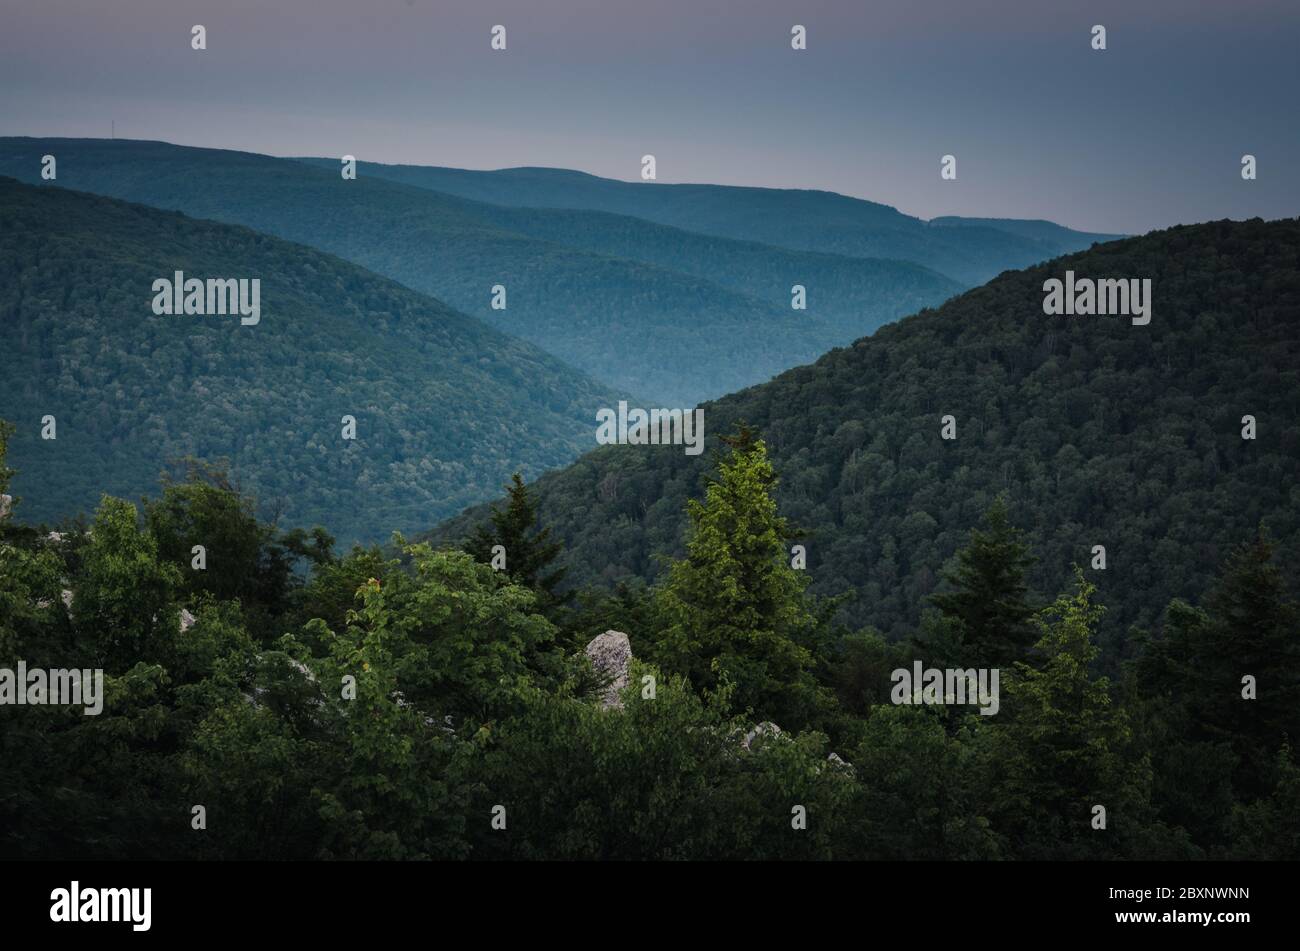 The Dolly Sods Wilderness contains bog and heath ecosystems, more commonly typical to southern Canada. Stock Photo